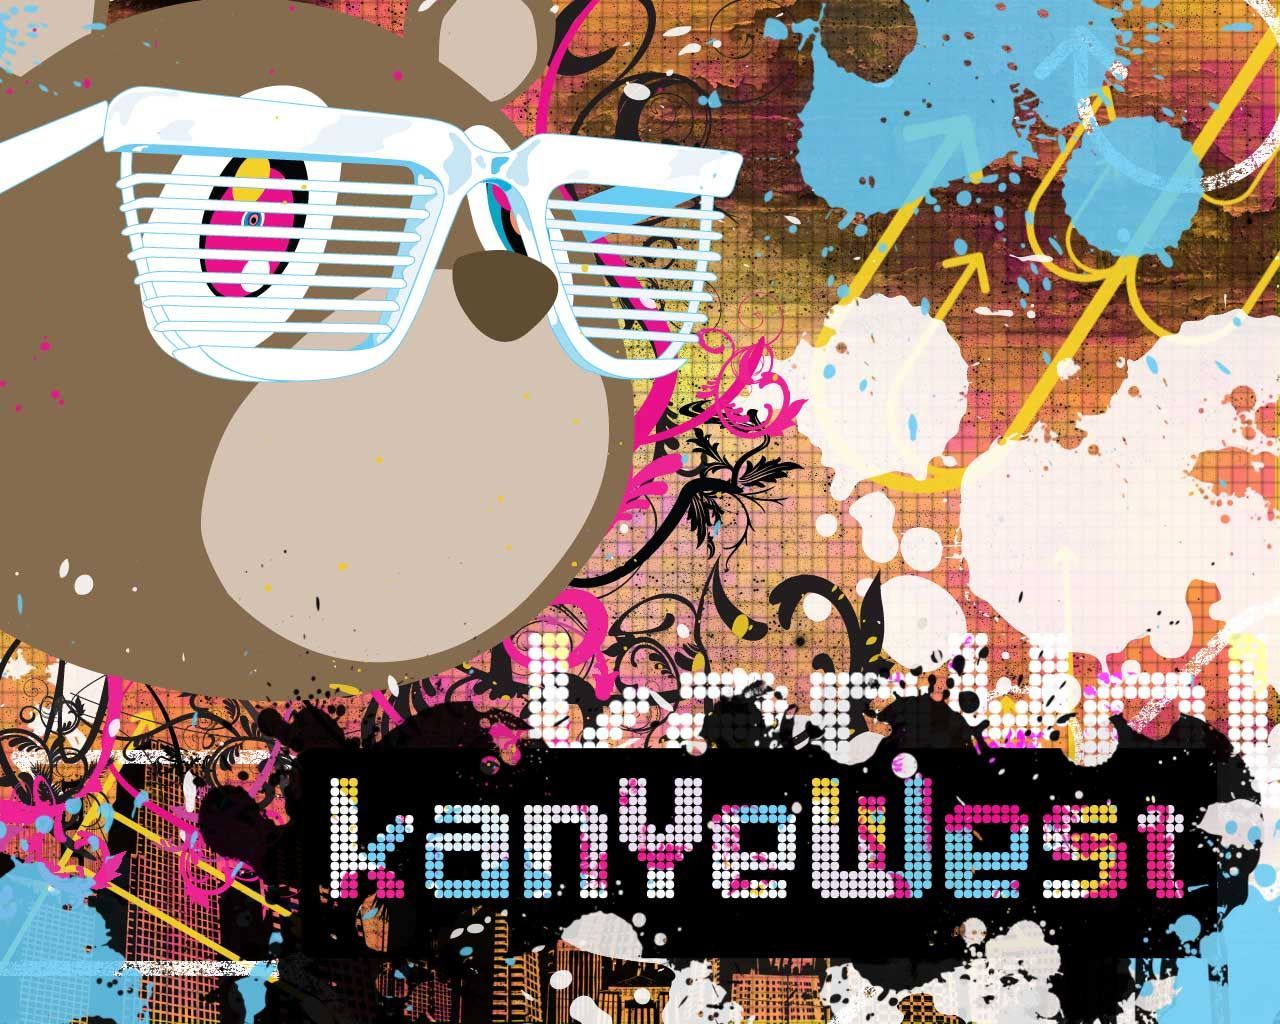 Kanye West - BANDSWALLPAPERS | free wallpapers, music wallpaper ...